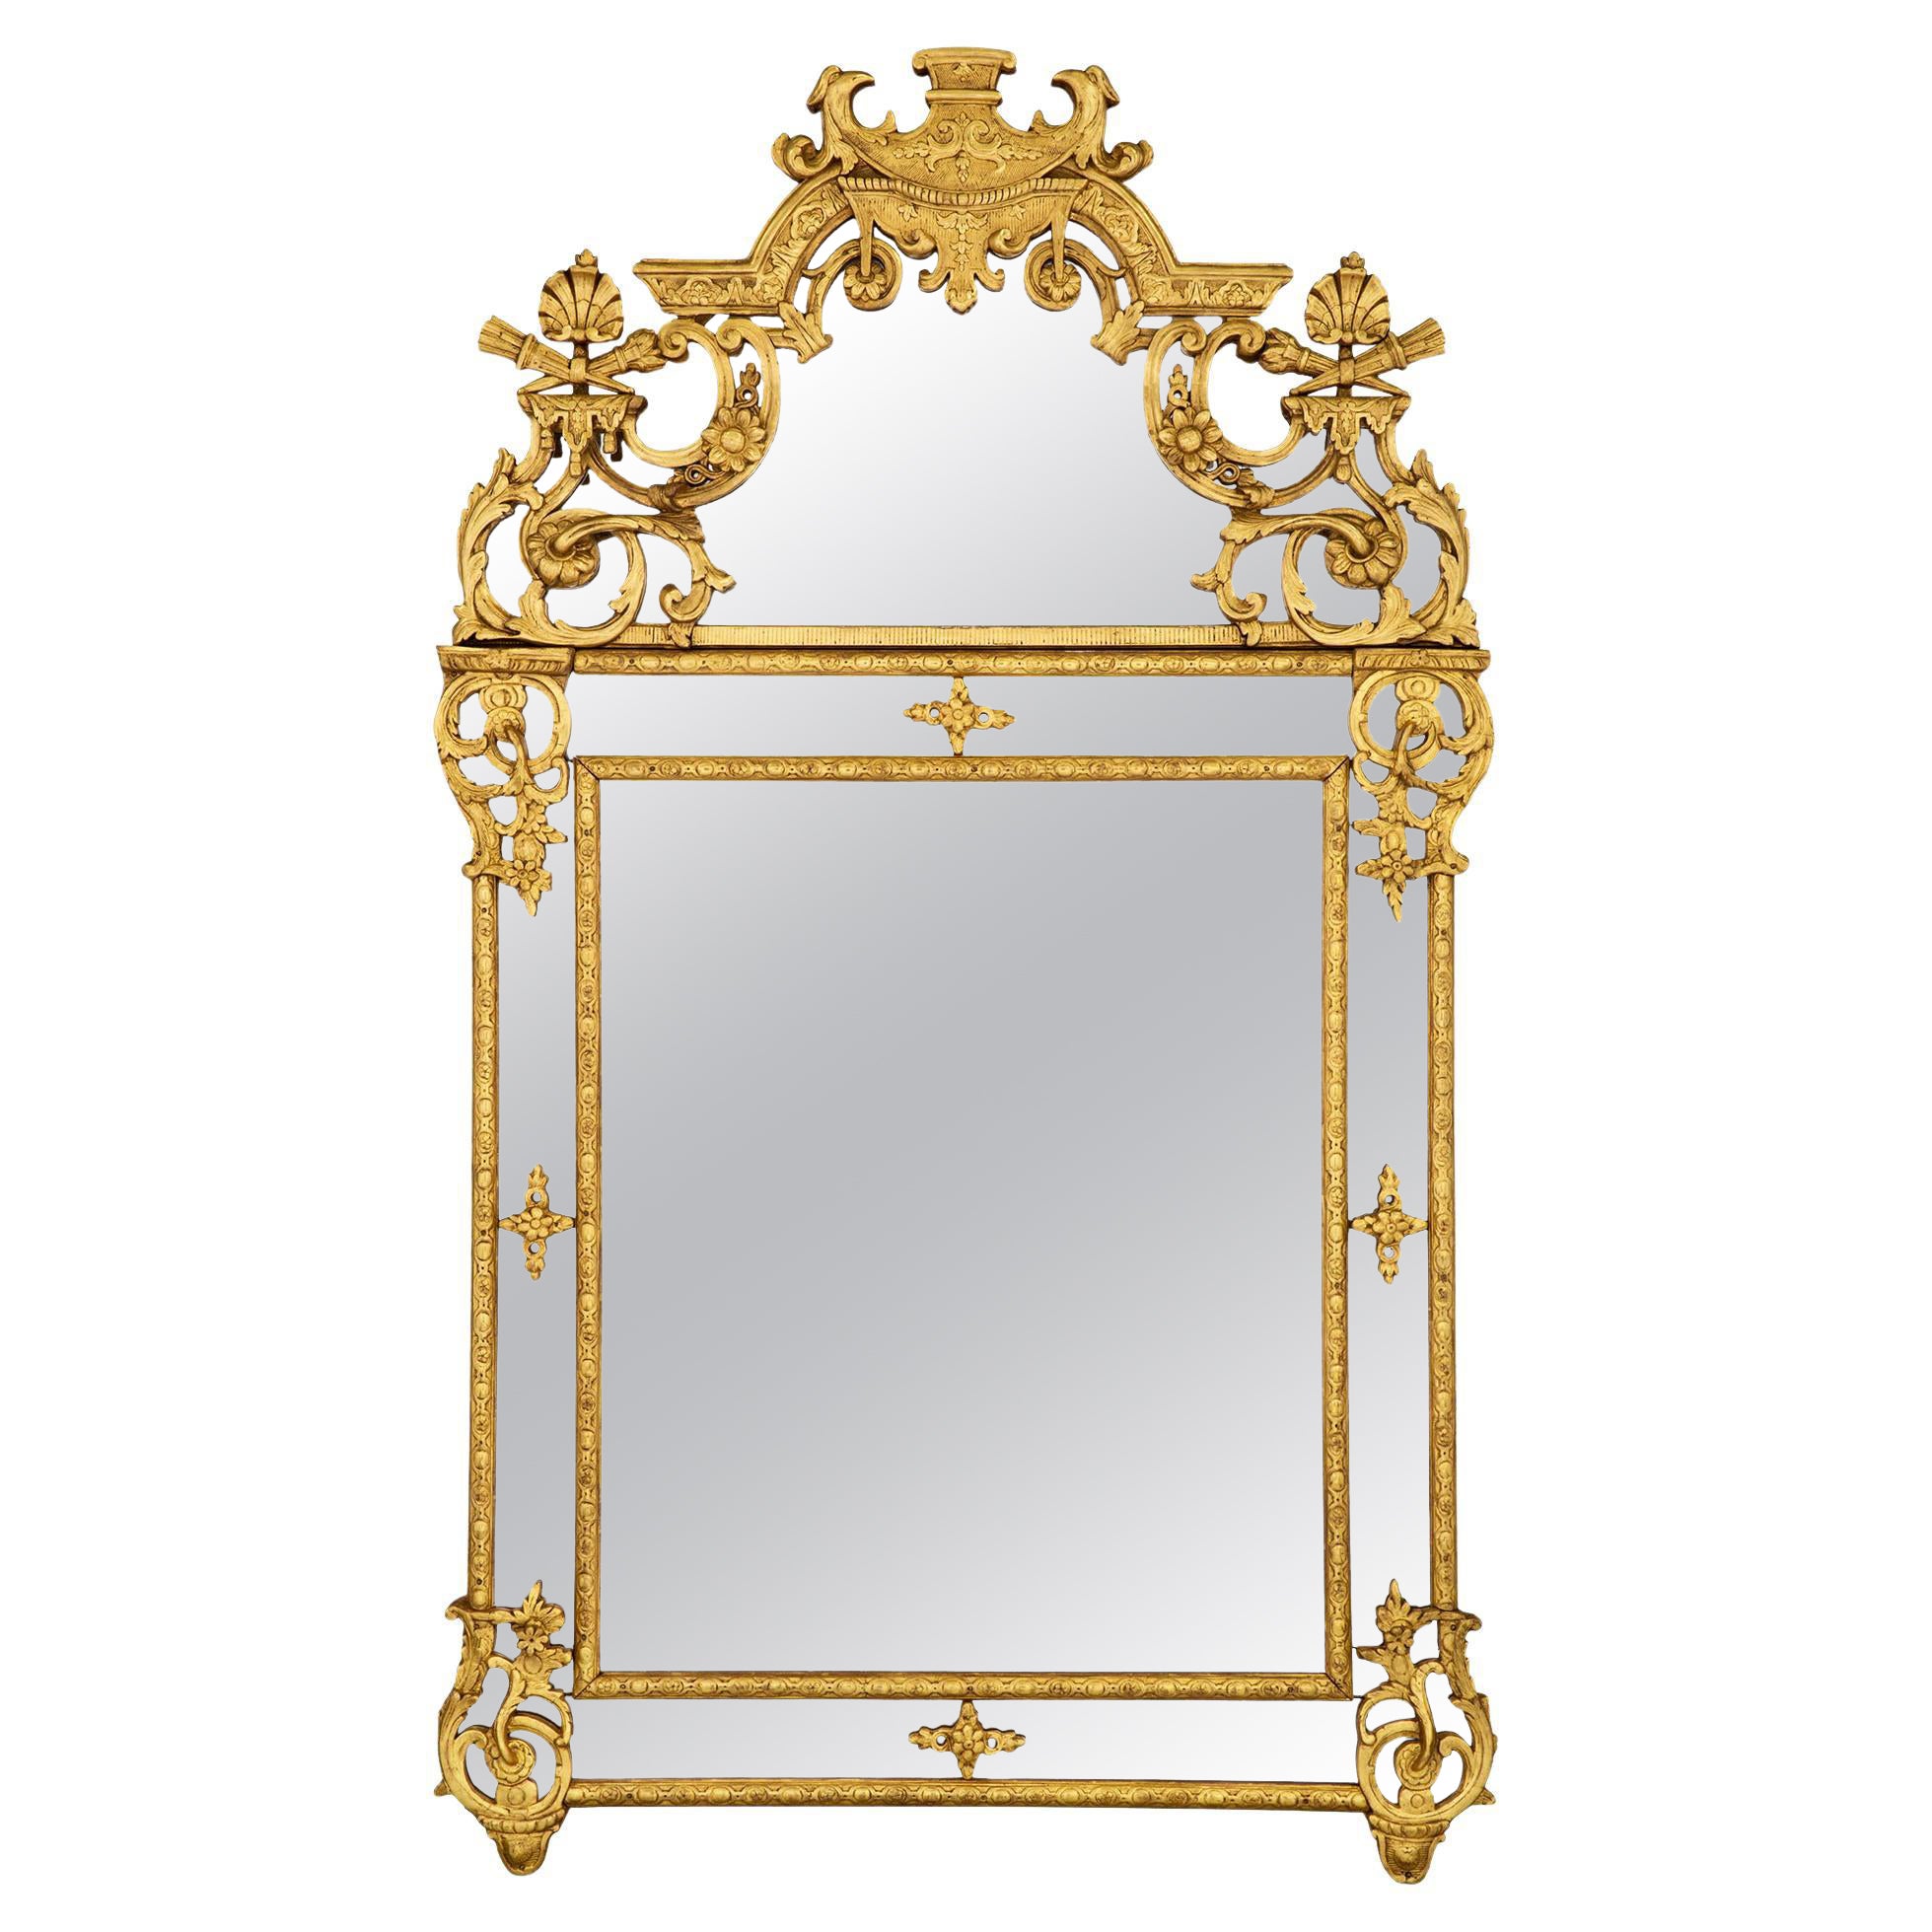 French 18th Century Regence Period Double Framed Giltwood Mirror